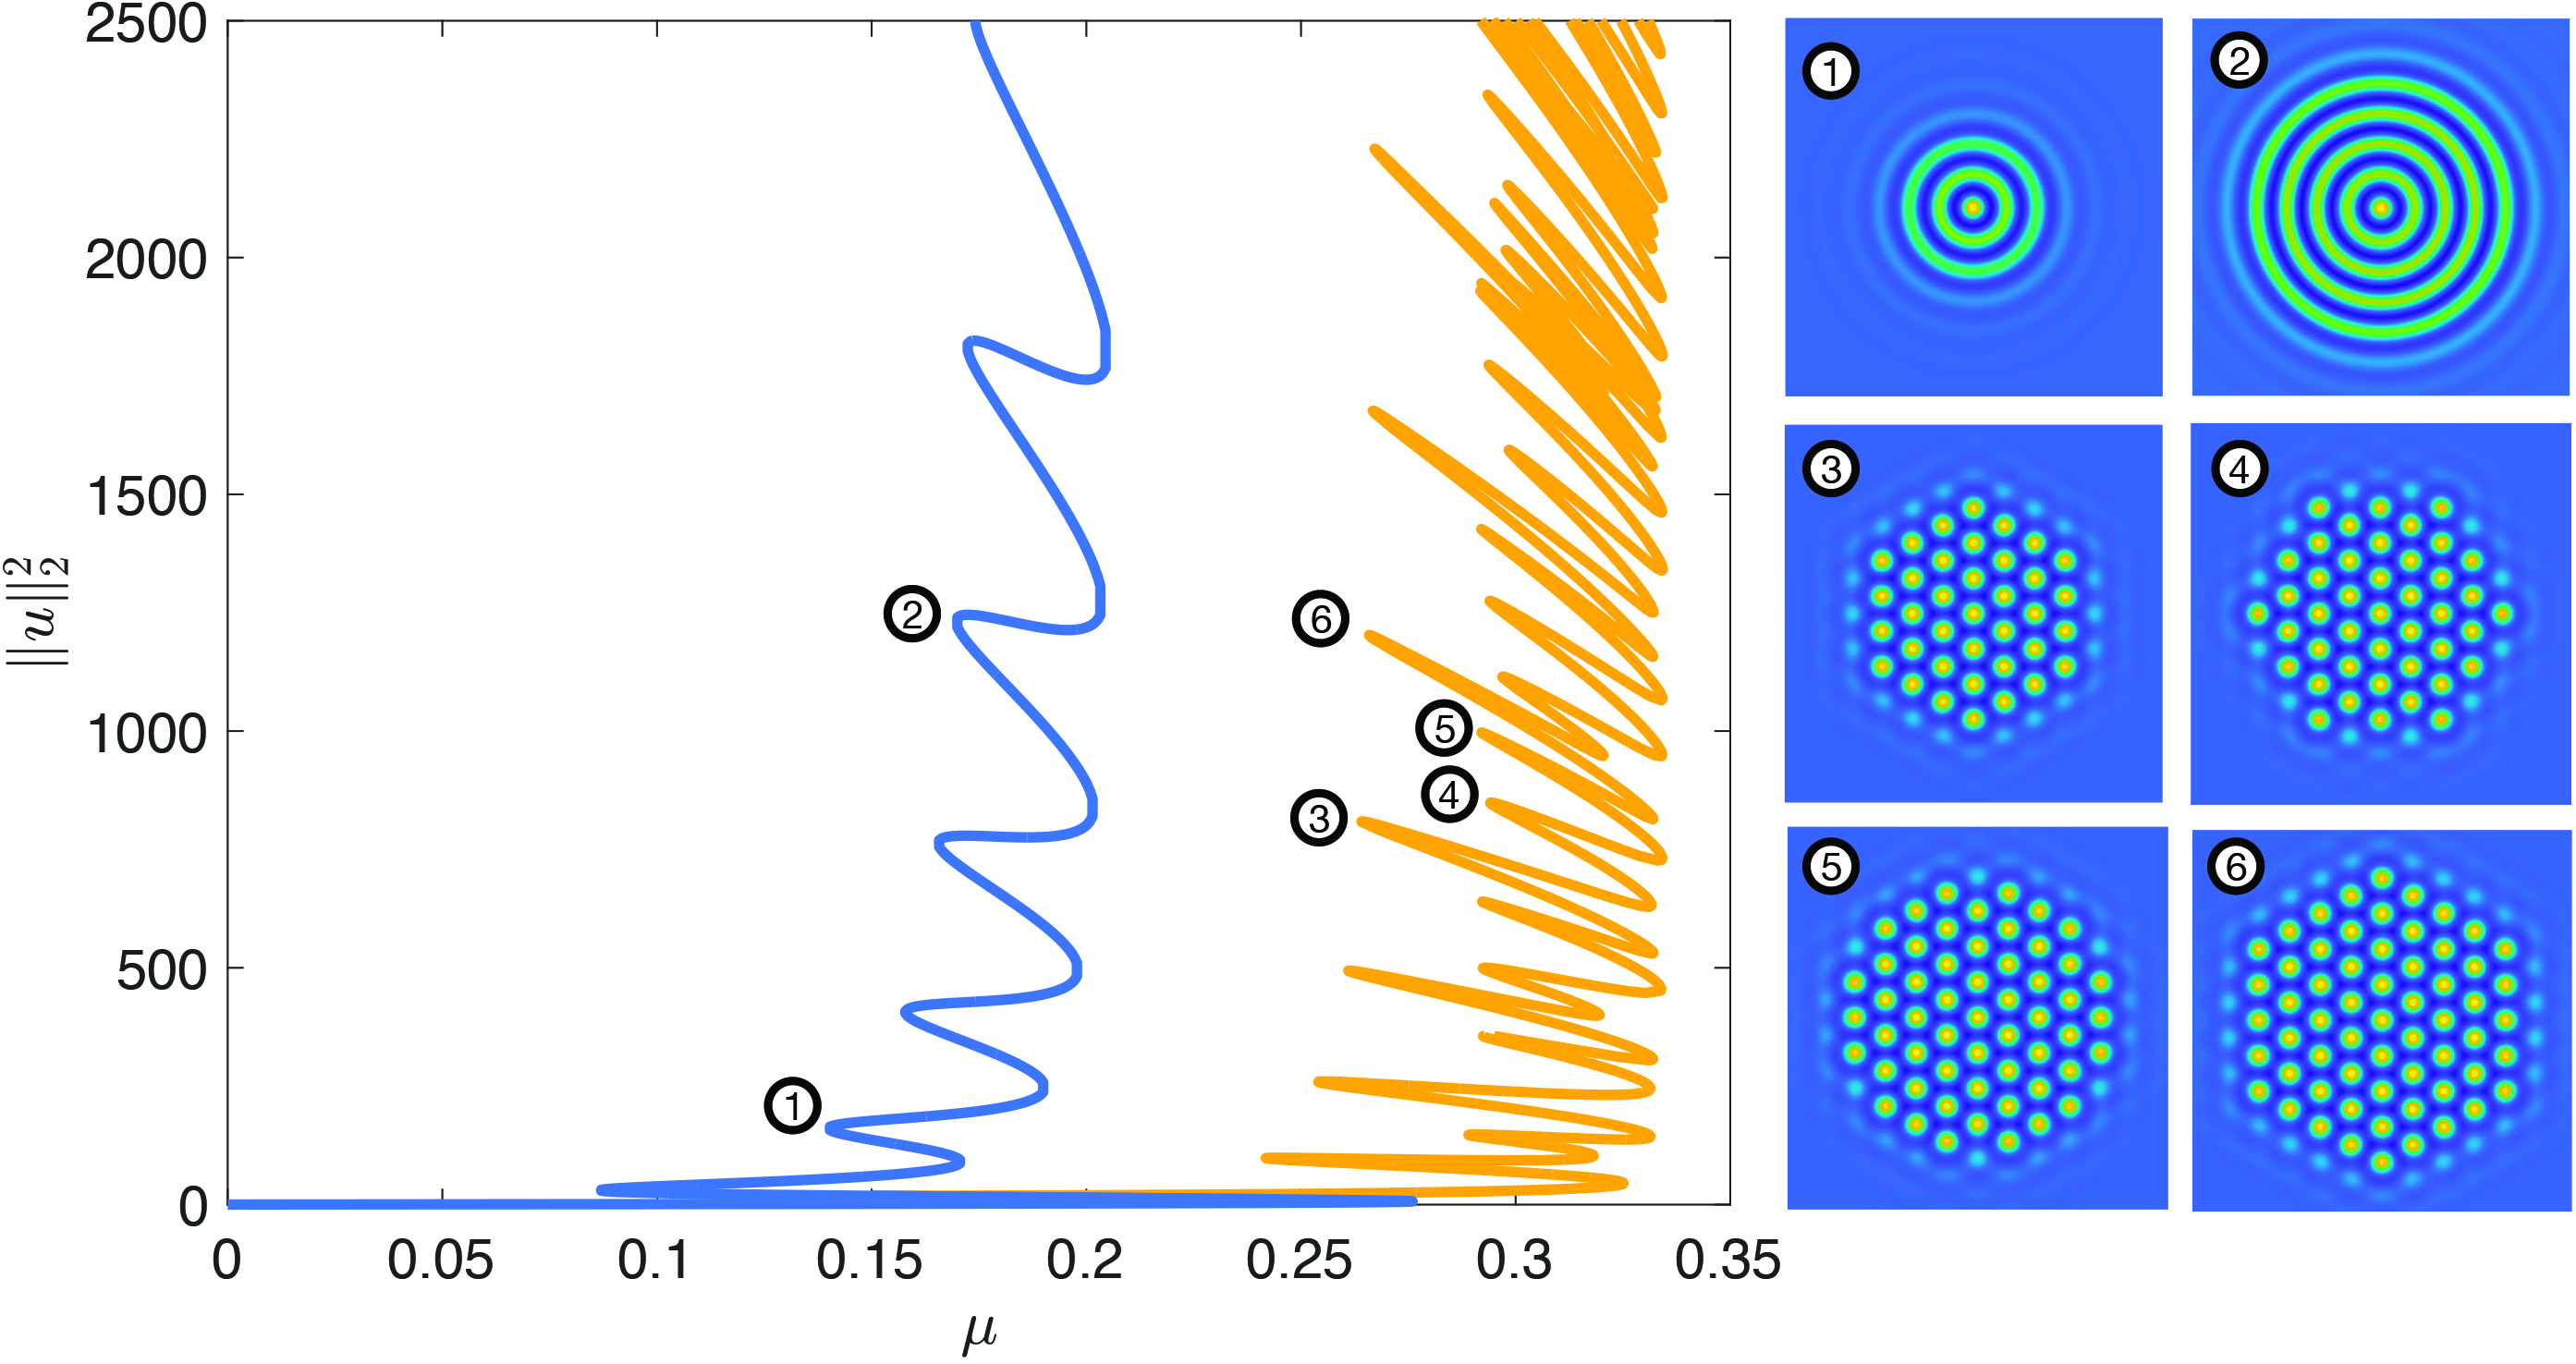 &lt;strong&gt;Figure 2.&lt;/strong&gt; Numerically continued bifurcation curves of localized spots (in blue) and hexagon patches (in yellow) for the two-dimensional Swift-Hohenberg equation in \((1)\) with \(\nu = 1.6\). Sample contour plots of the profiles are provided at folds along the curves. Courtesy of David Lloyd.